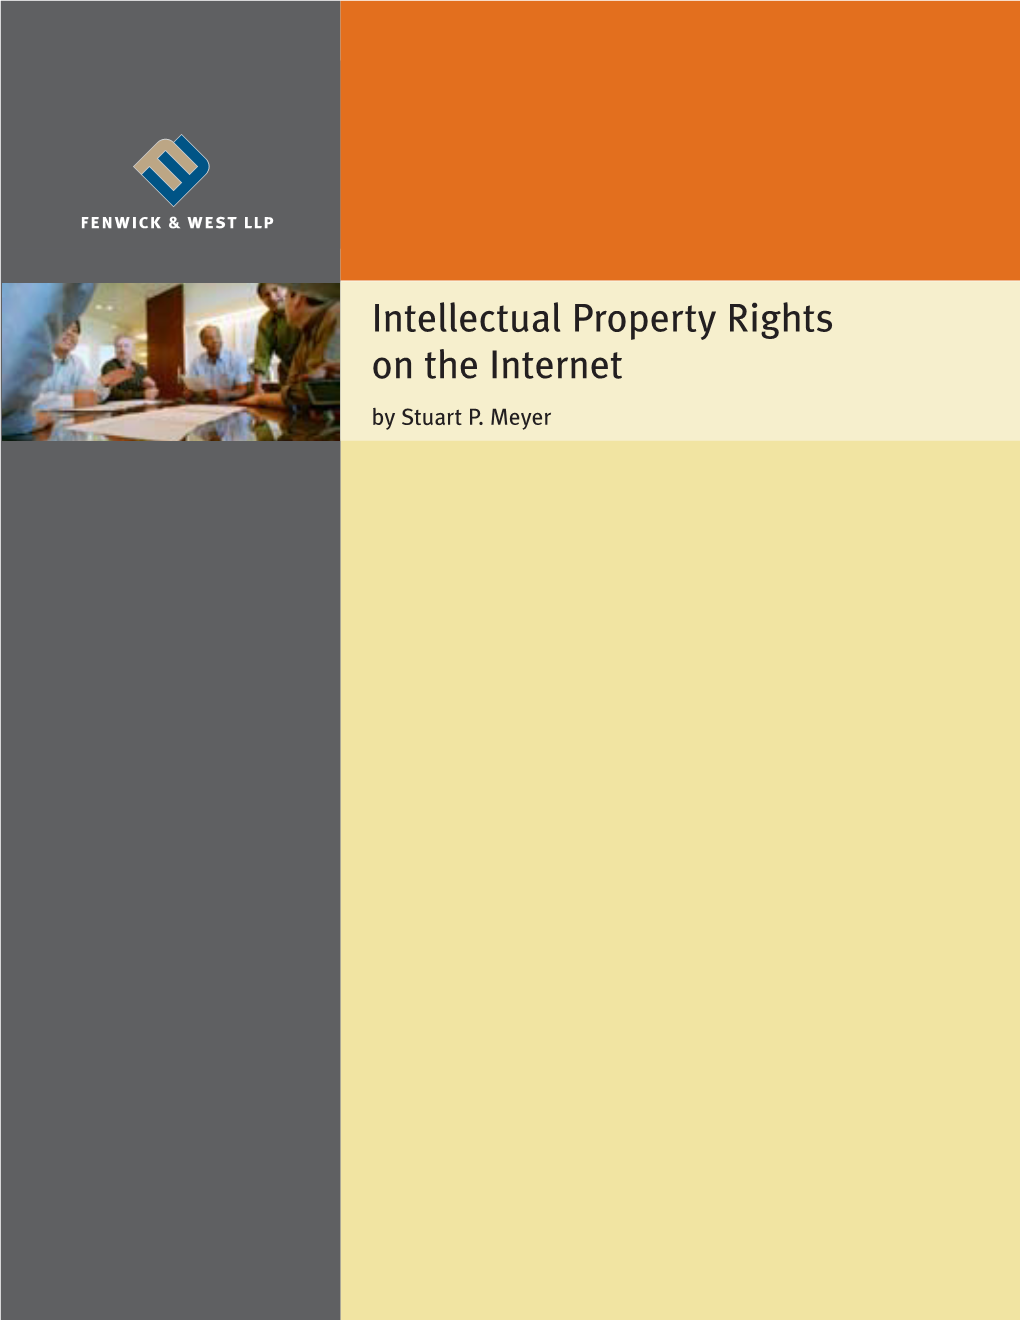 Intellectual Property Rights on the Internet by Stuart P